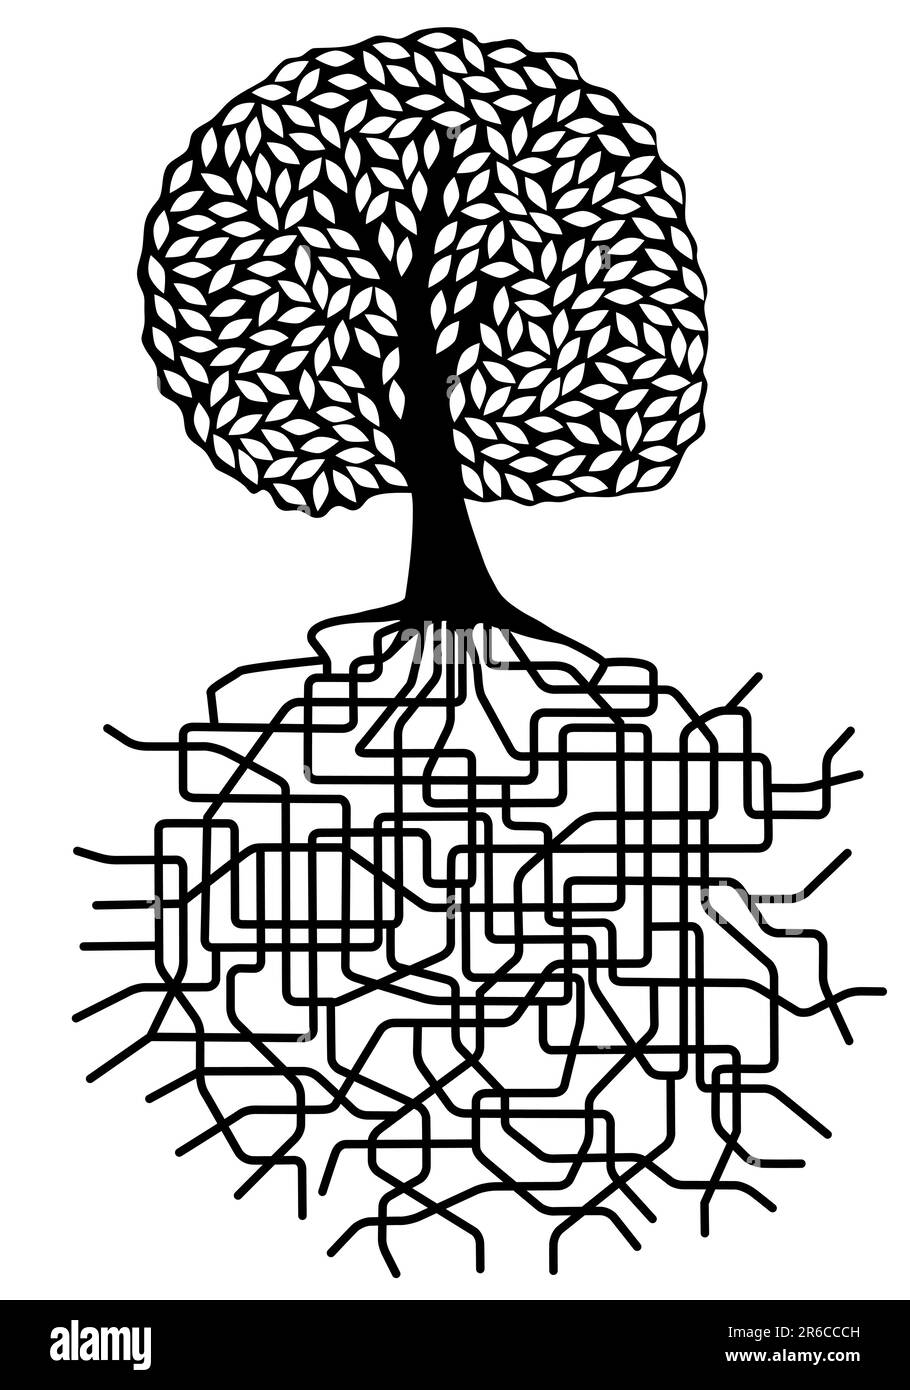 Editable vector design of a tree with root system Stock Vector